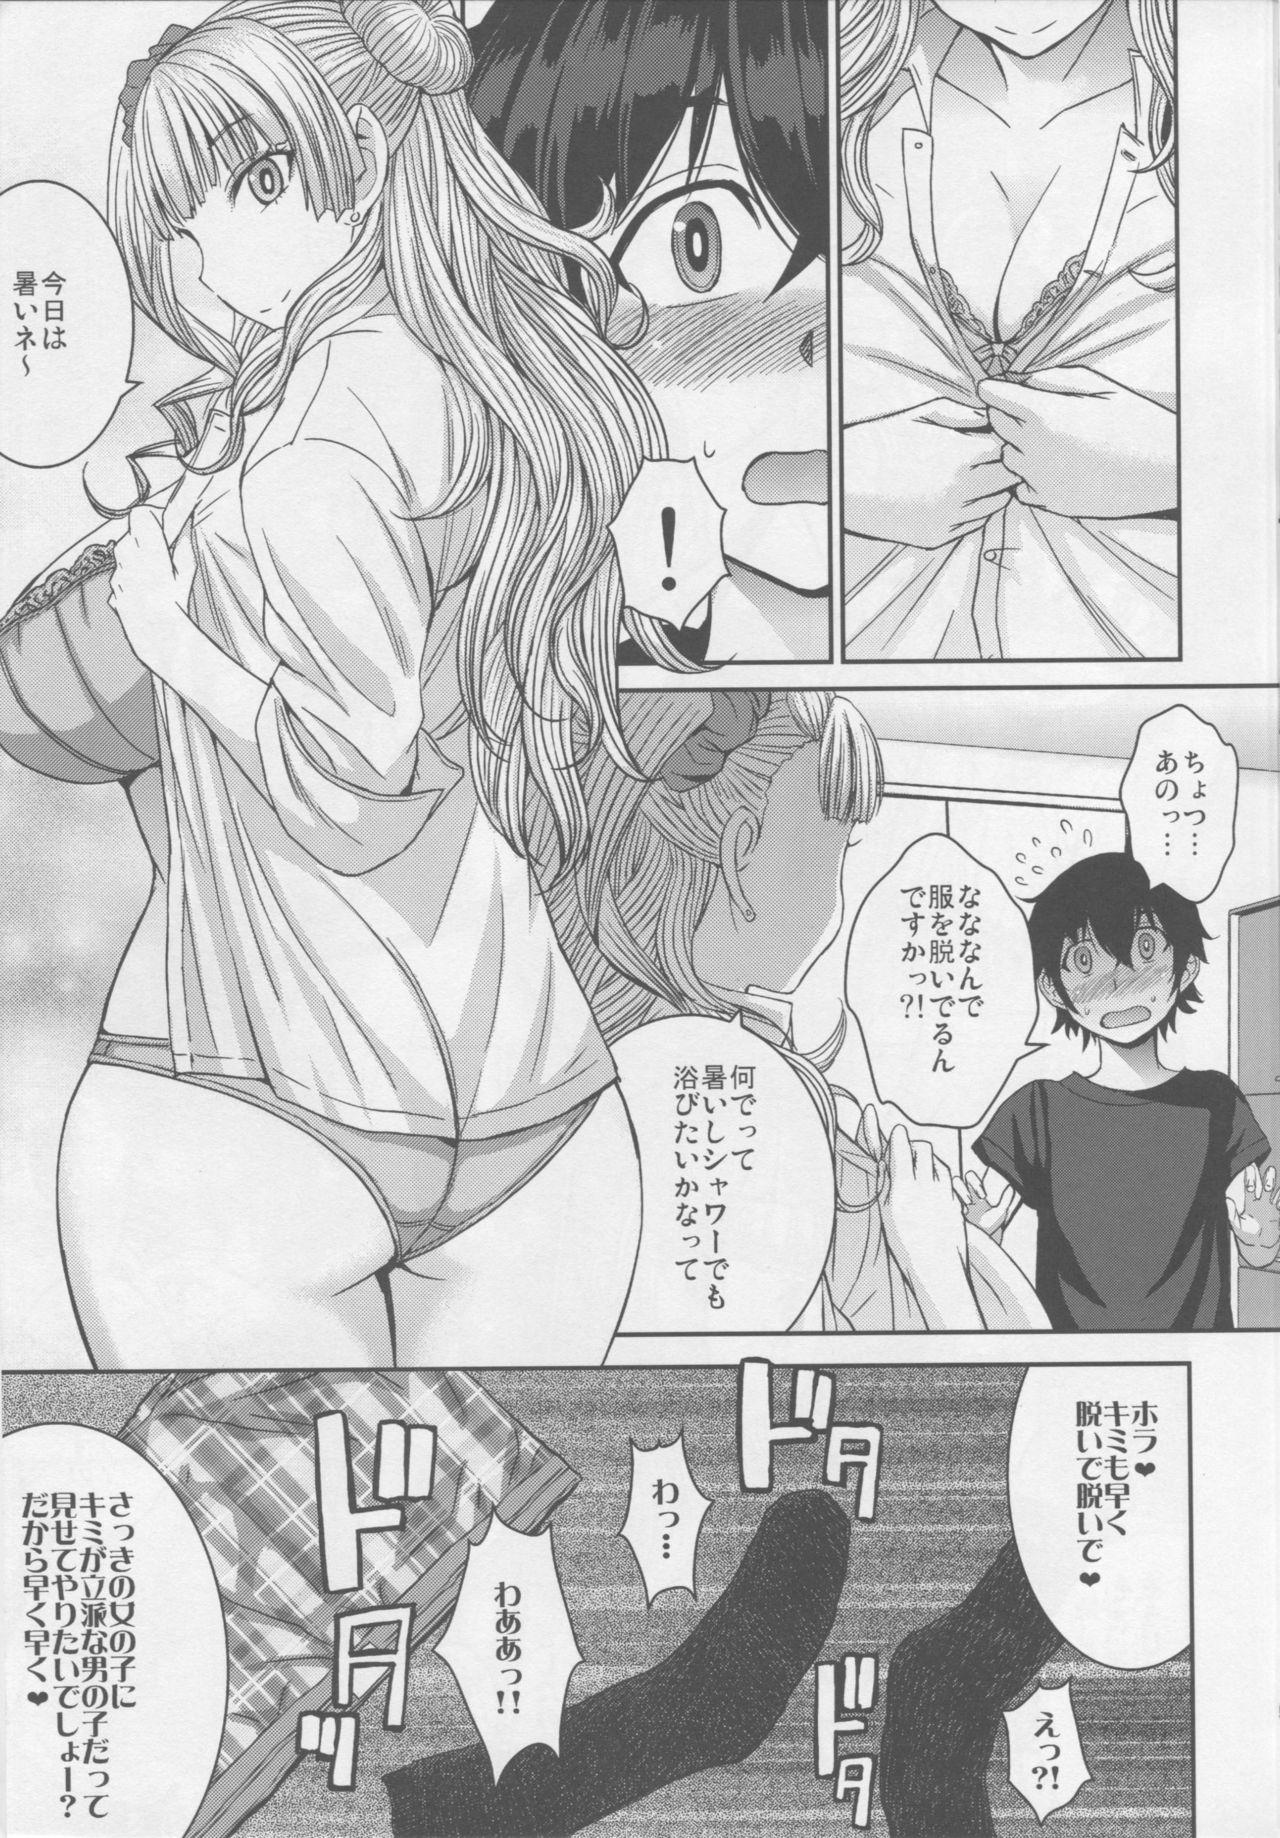 Bedroom Boy Meets Gal - Oshiete galko-chan Titty Fuck - Page 6